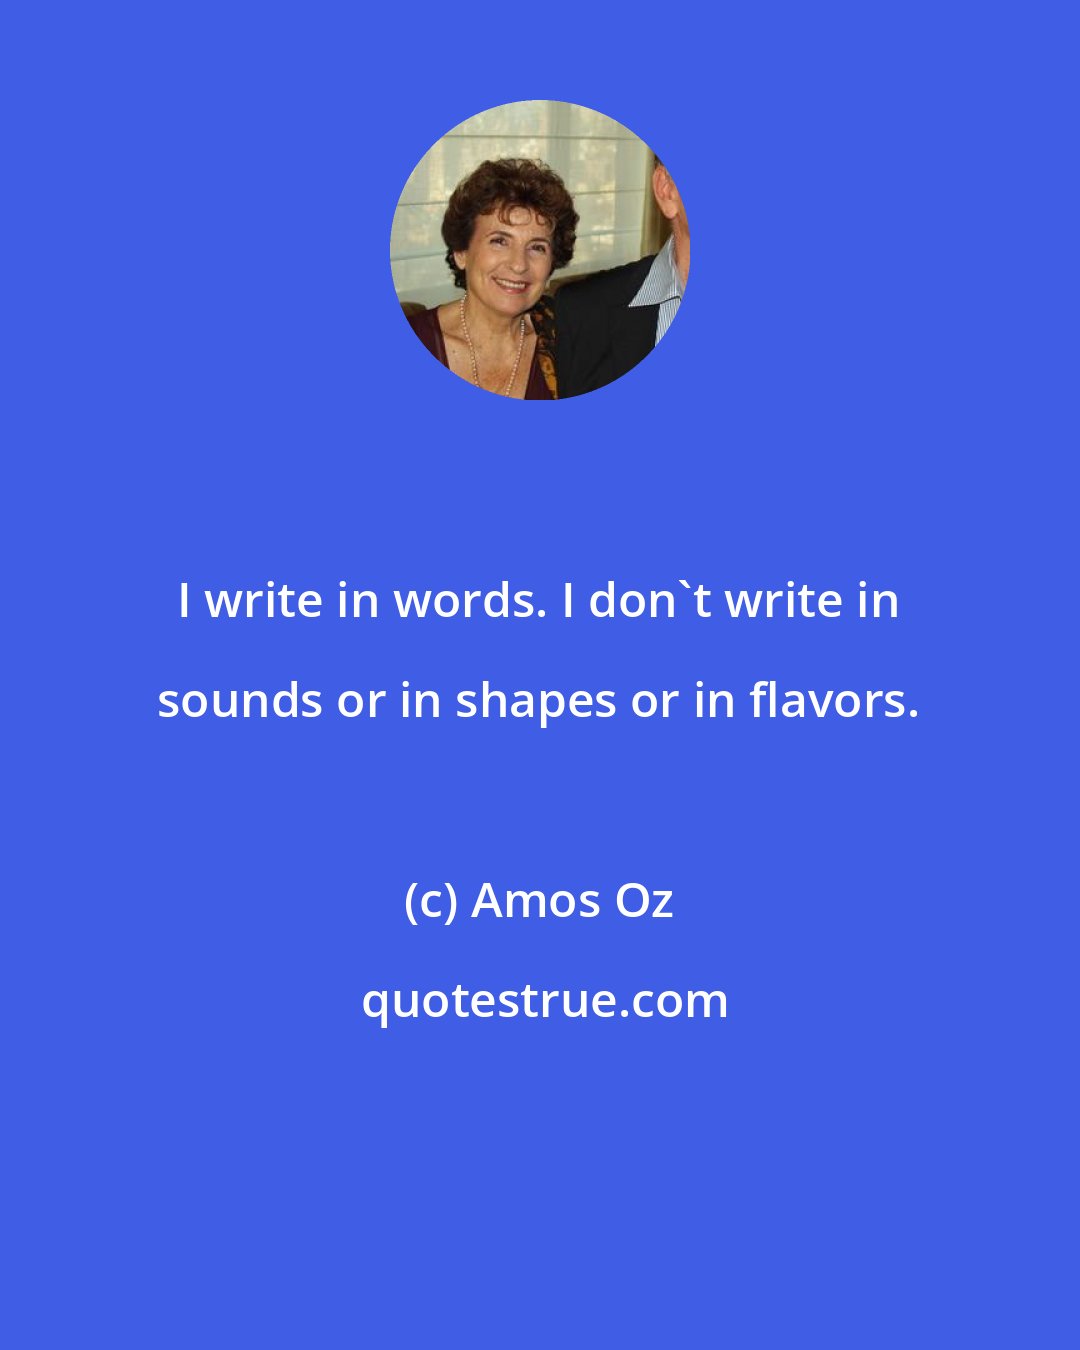 Amos Oz: I write in words. I don't write in sounds or in shapes or in flavors.